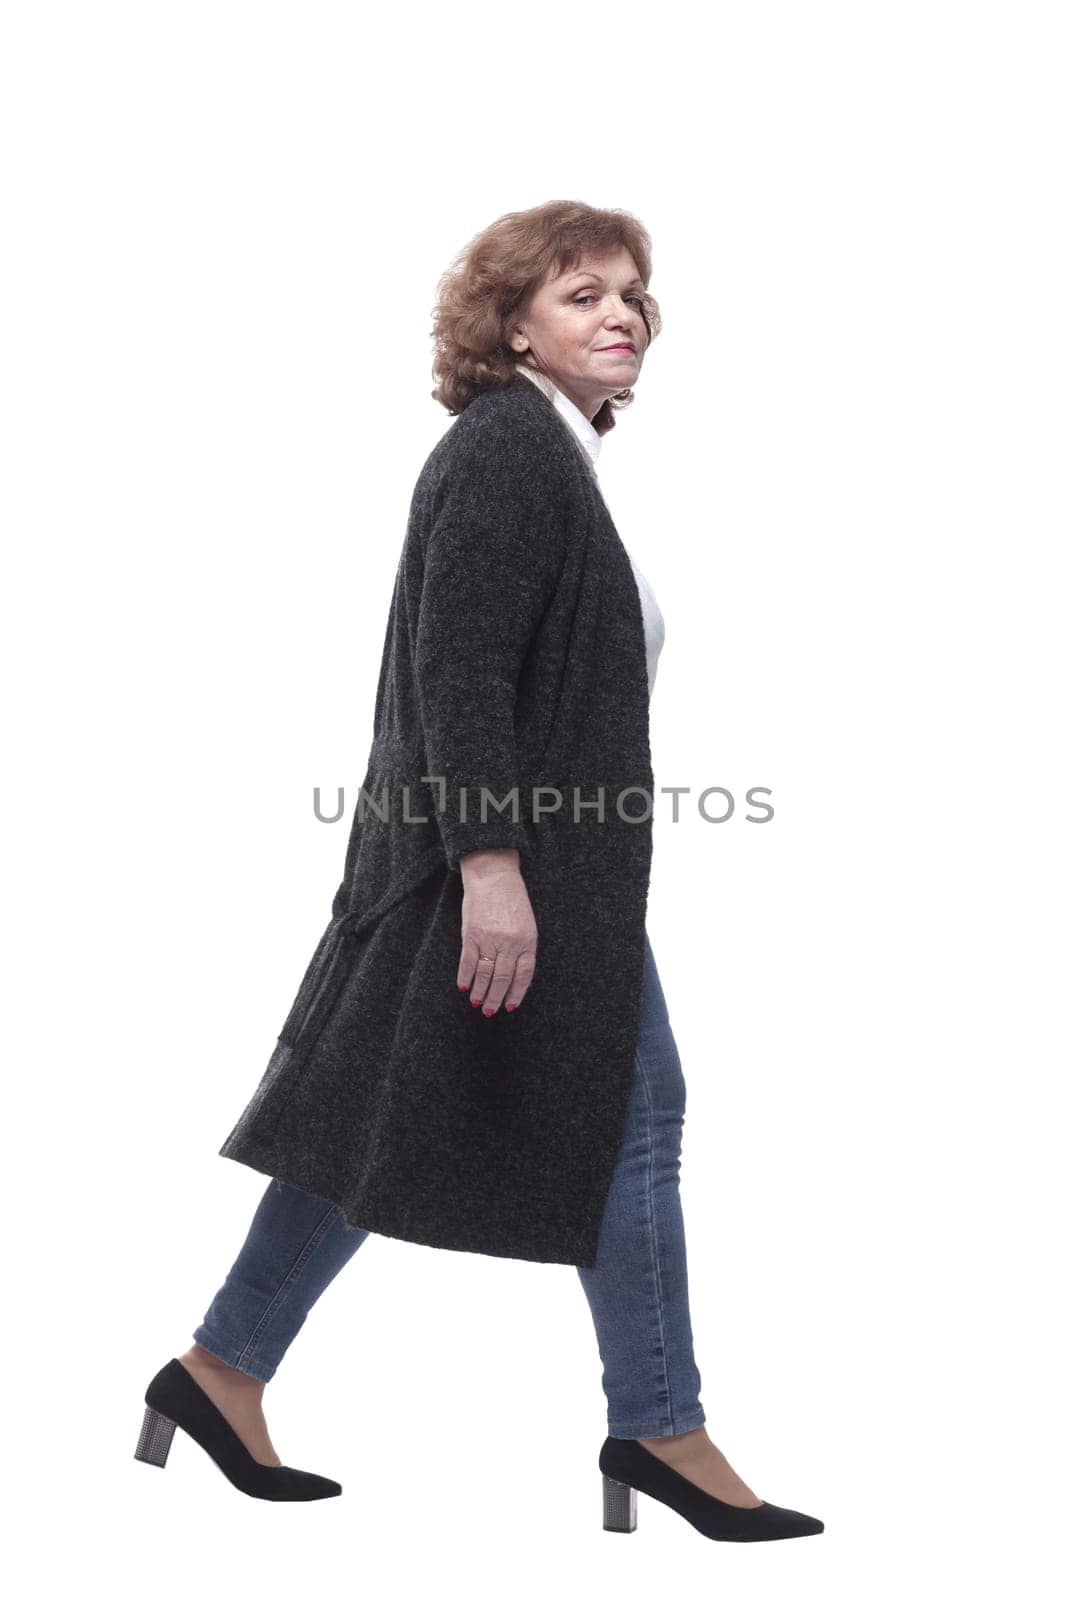 in full growth. confident mature woman taking a step forward. isolated on a white background